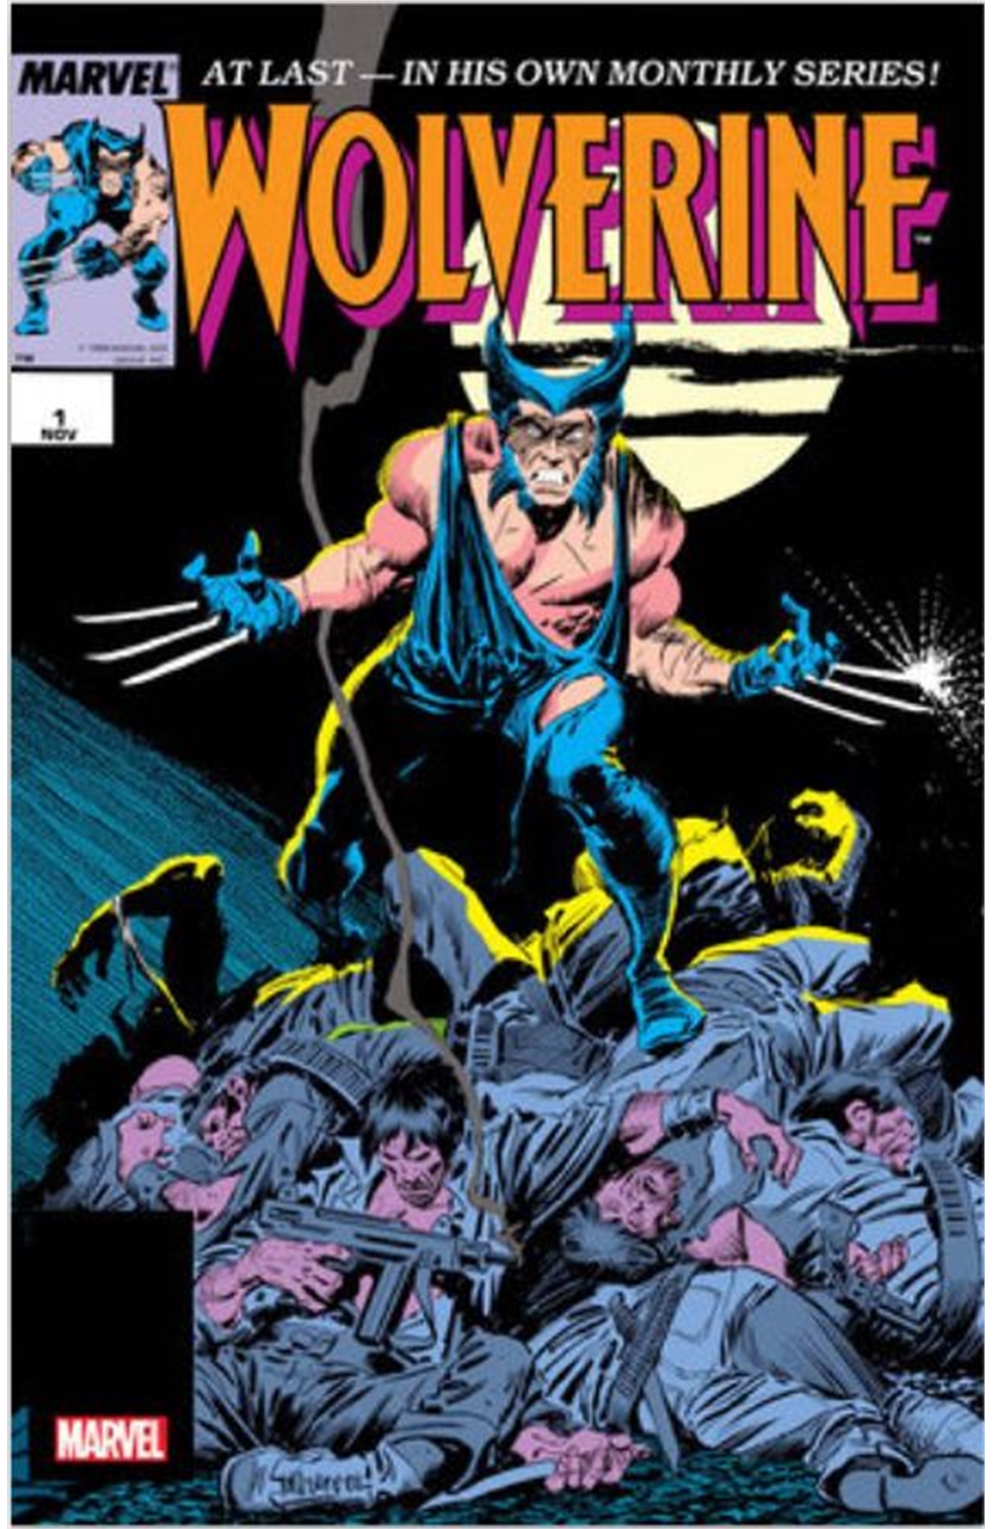 Wolverine #1 By Claremont & Buscema Facsimile Folded Poster